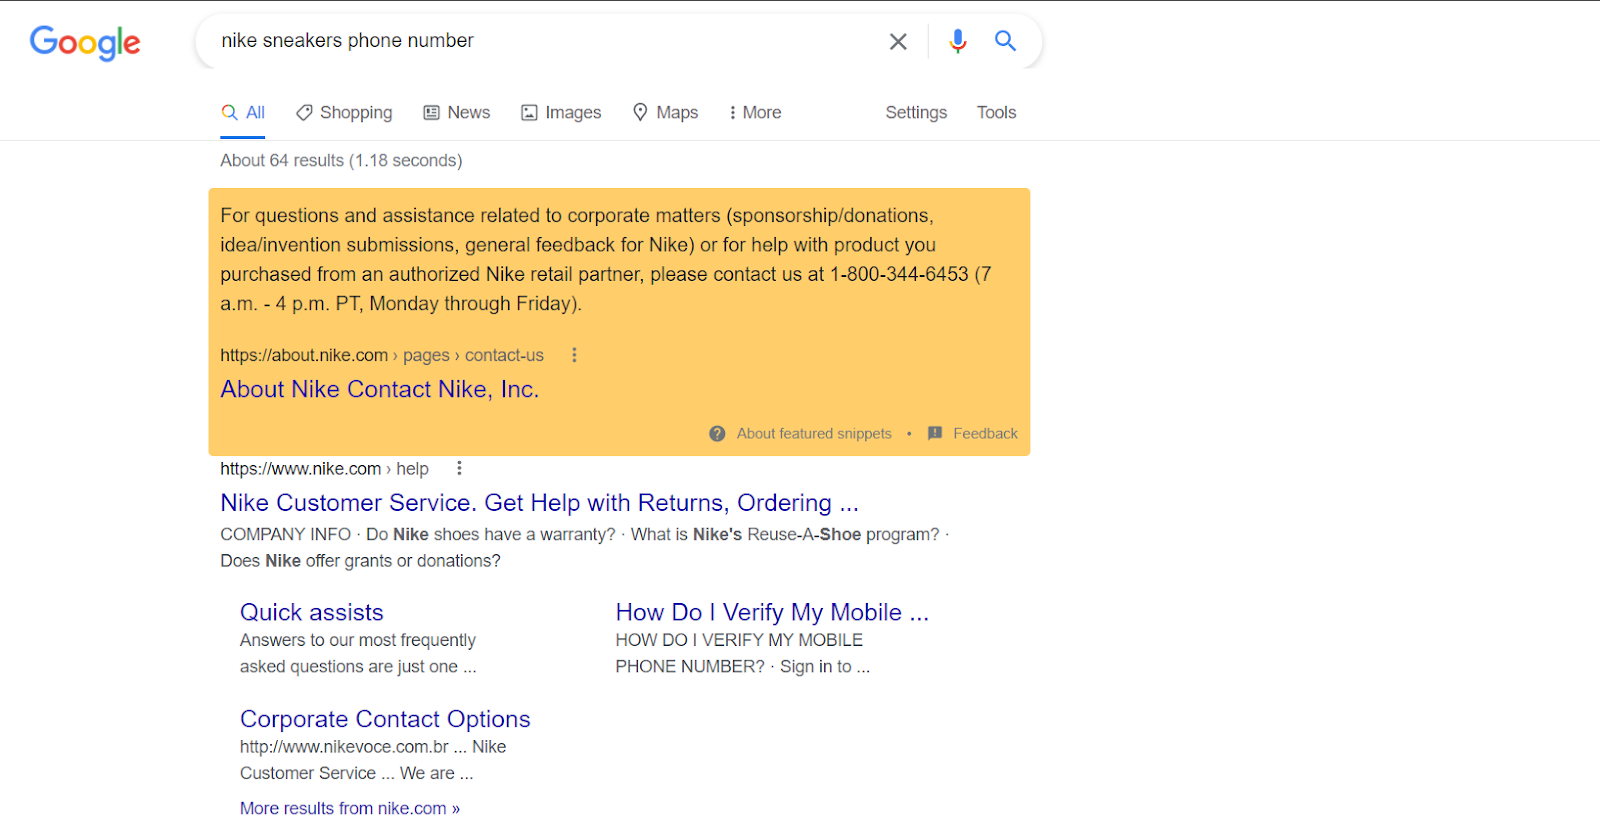 6 Strategies to Optimize your Content for Google's Featured Snippet